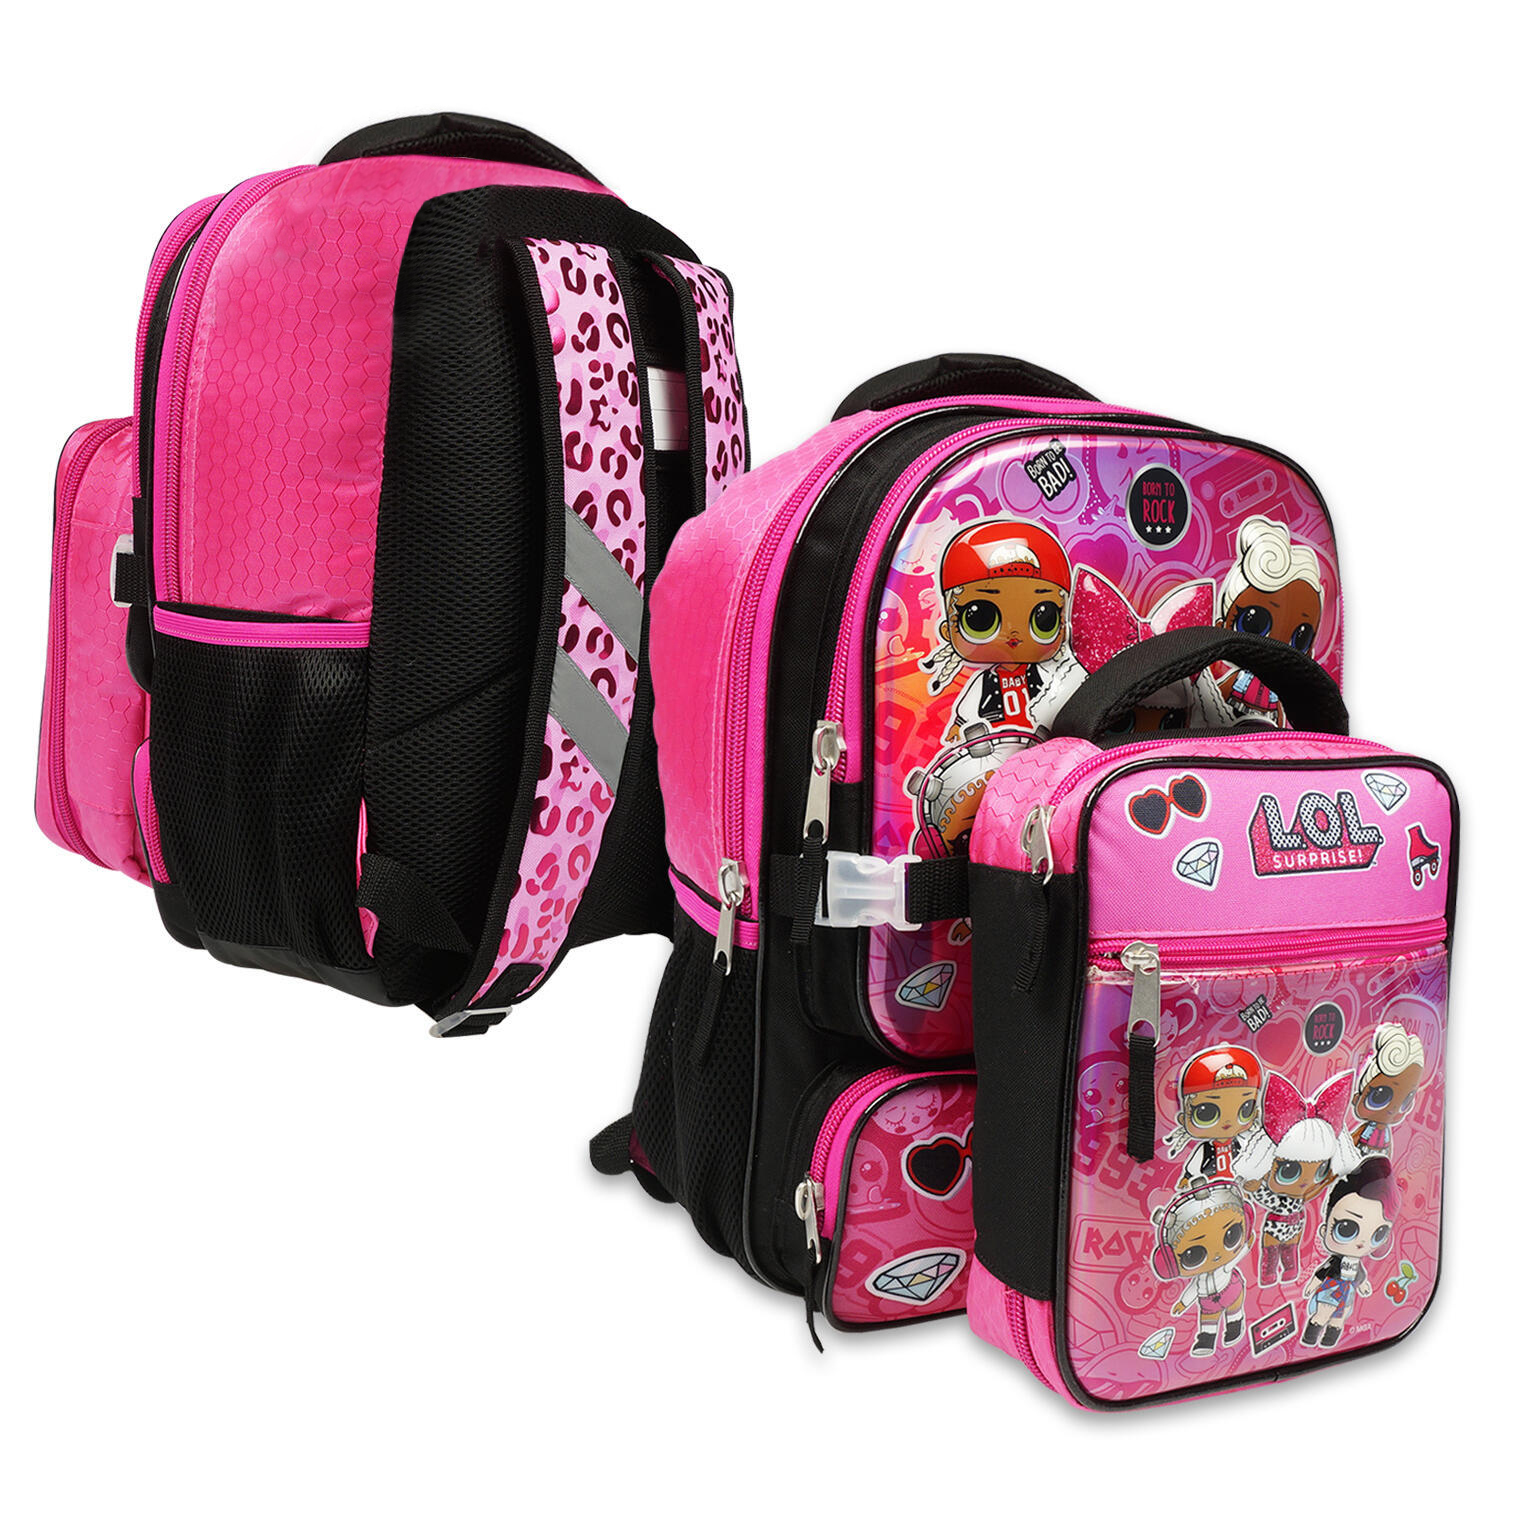 LOL SURPRISE Small 12" inches Backpack & Lunch Box New Style Licensed Product 